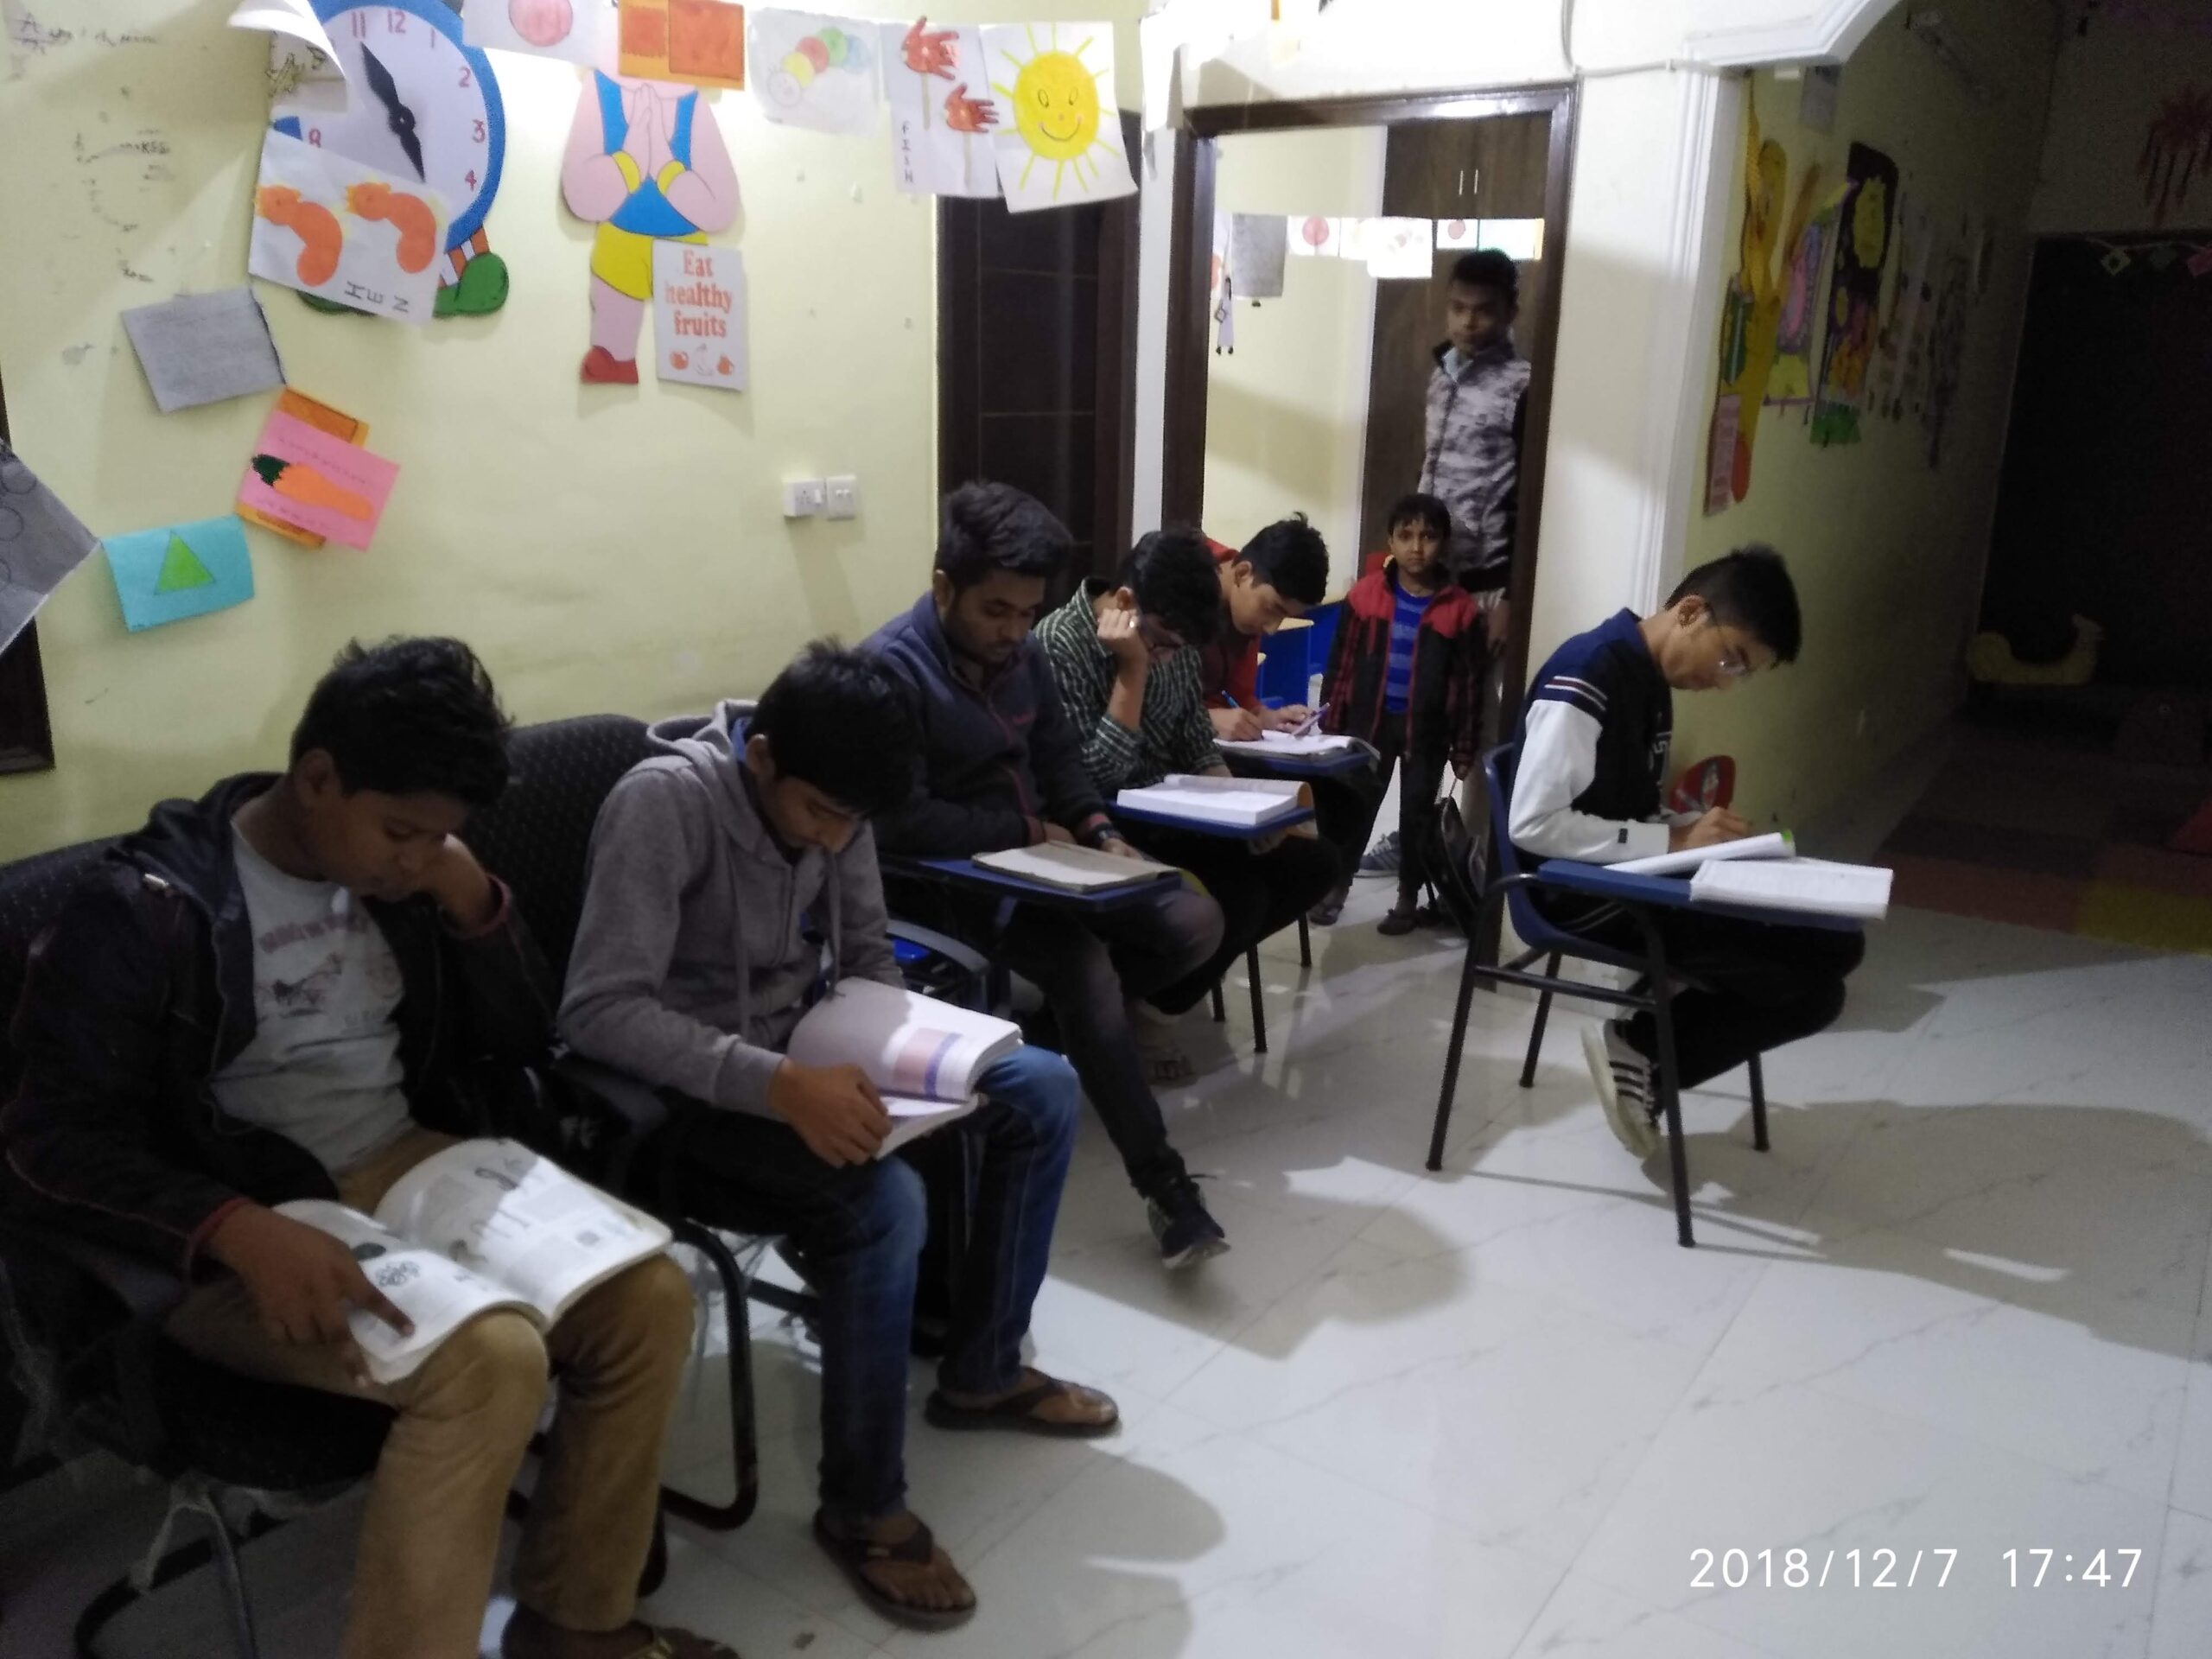 RBL Academy provides Best coaching, home tutor home tuition, online coaching classes, Project and assignment solutions for all subjects of Class 11 and 12 Accounts, Business Studies and economics.